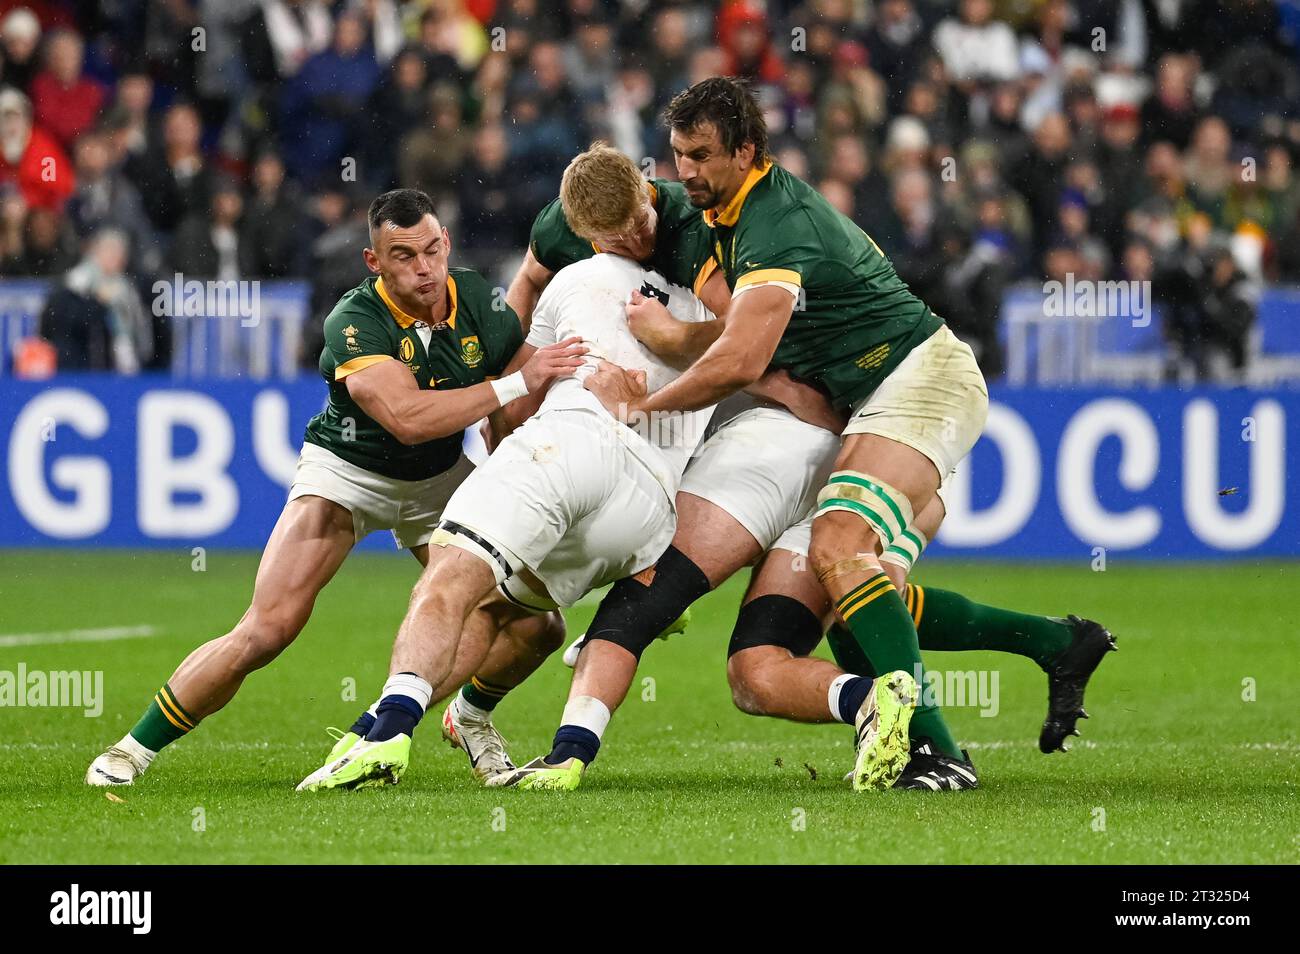 Saint Denis, France. 21st Oct, 2023. Julien Mattia/Le Pictorium - England - South Africa - Rugby World Cup - 21/10/2023 - France/Seine-Saint-Denis/Saint-Denis - Jesse Kriel, Pieter-Steph Du Toit and Eben Etzebeth stop the English attack during the Rugby World Cup semi-final between England and South Africa at the Stade de France on October 21, 2023. Credit: LE PICTORIUM/Alamy Live News Stock Photo